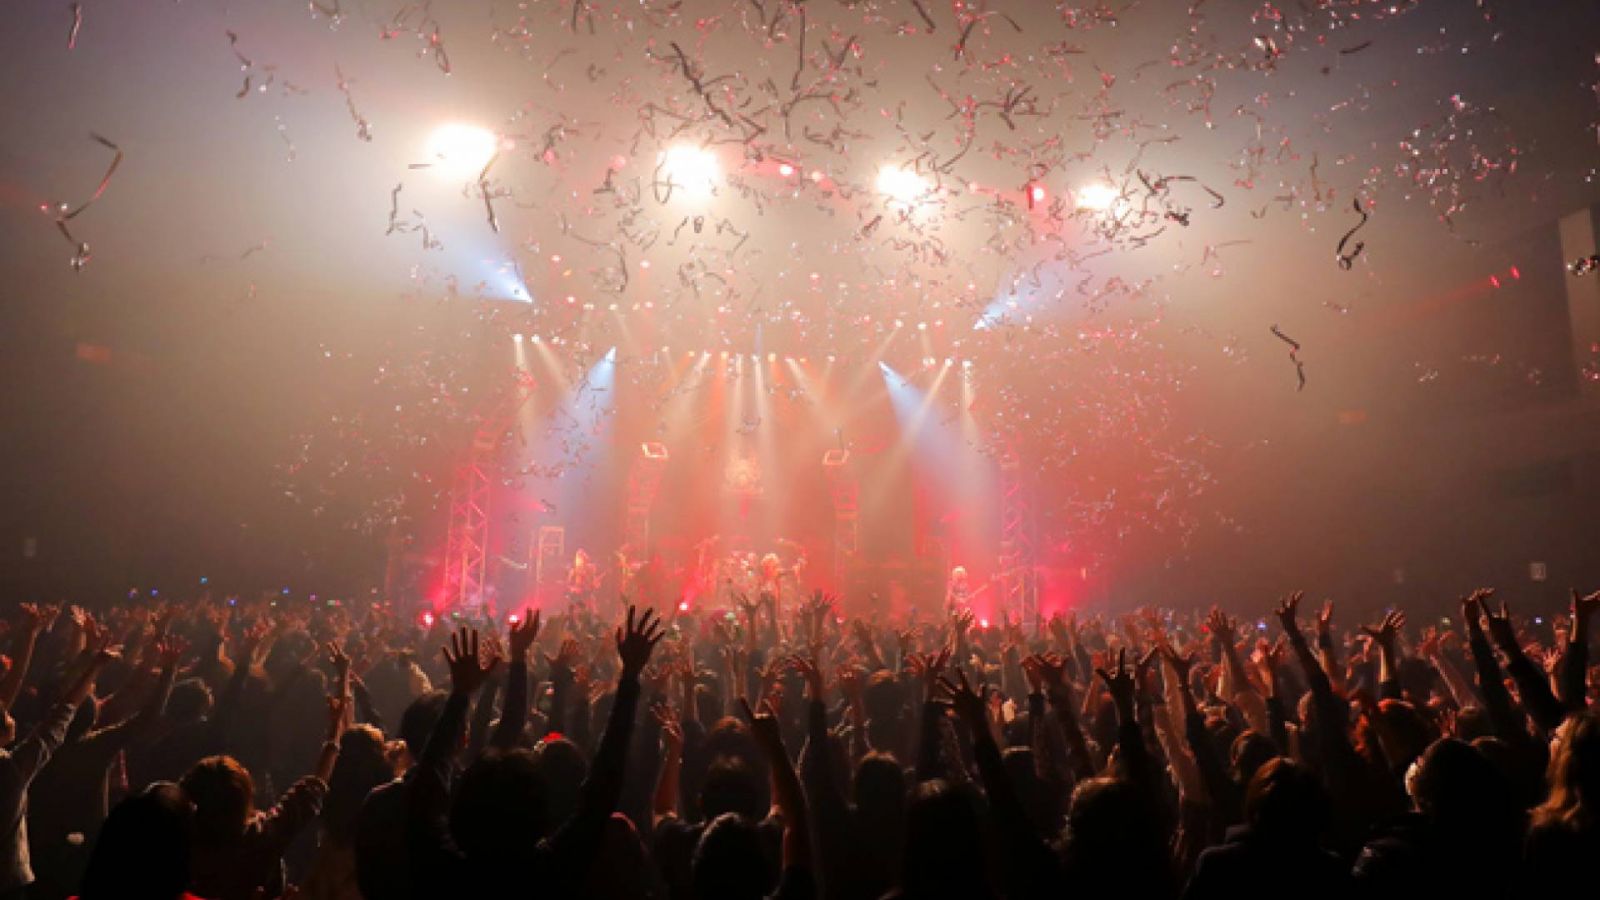 Versailles 10th Anniversary Tour -Grand Finale- “CHATEAU DE VERSAILLES” w Zepp Tokyo © CHATEAU AGENCY CO., Ltd. All rights reserved.